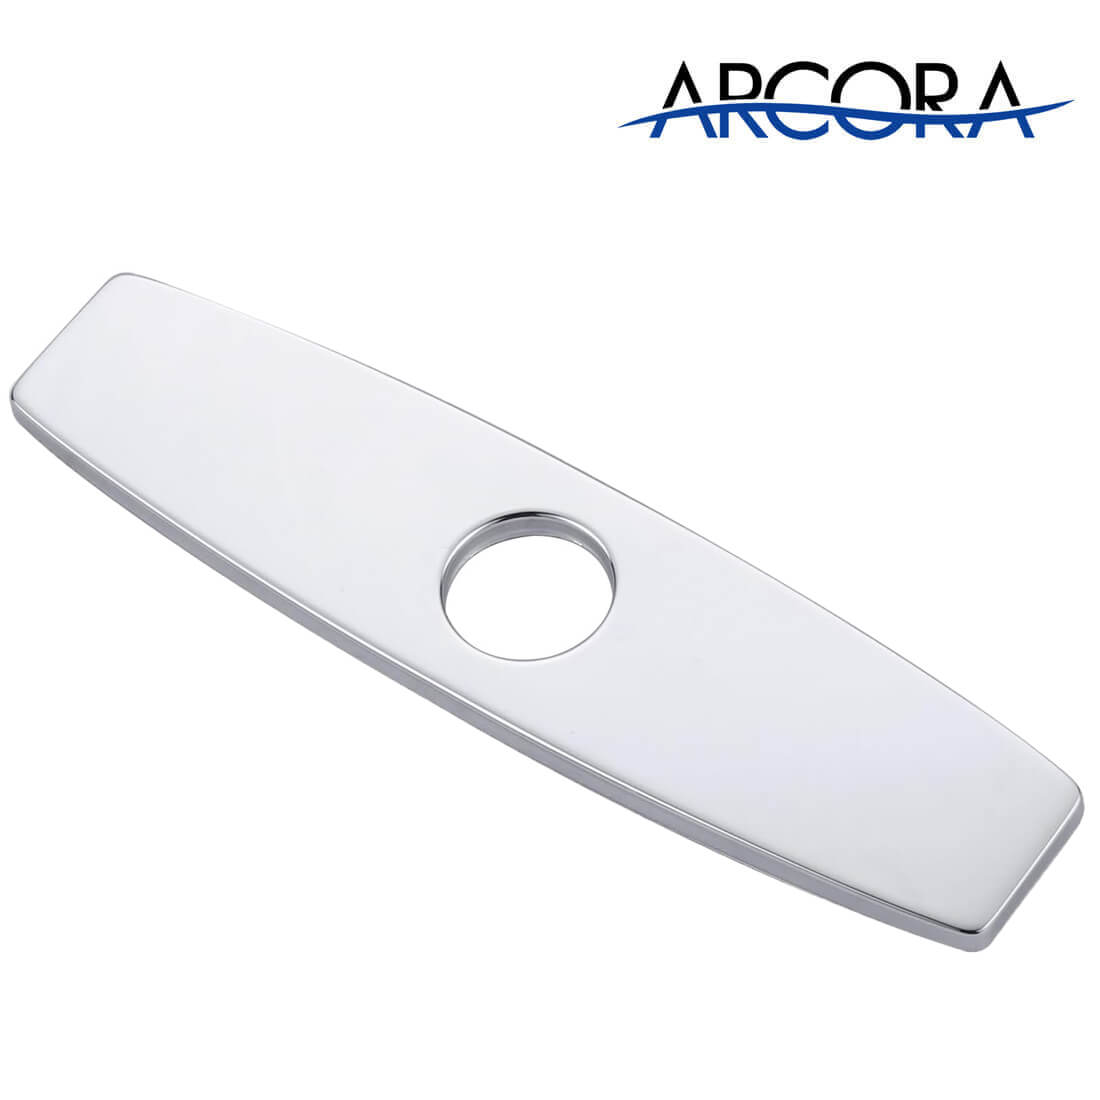 ARCORA 9.6 Inch Chrome Faucet Hole Cover Stainless Steel Deck Plate